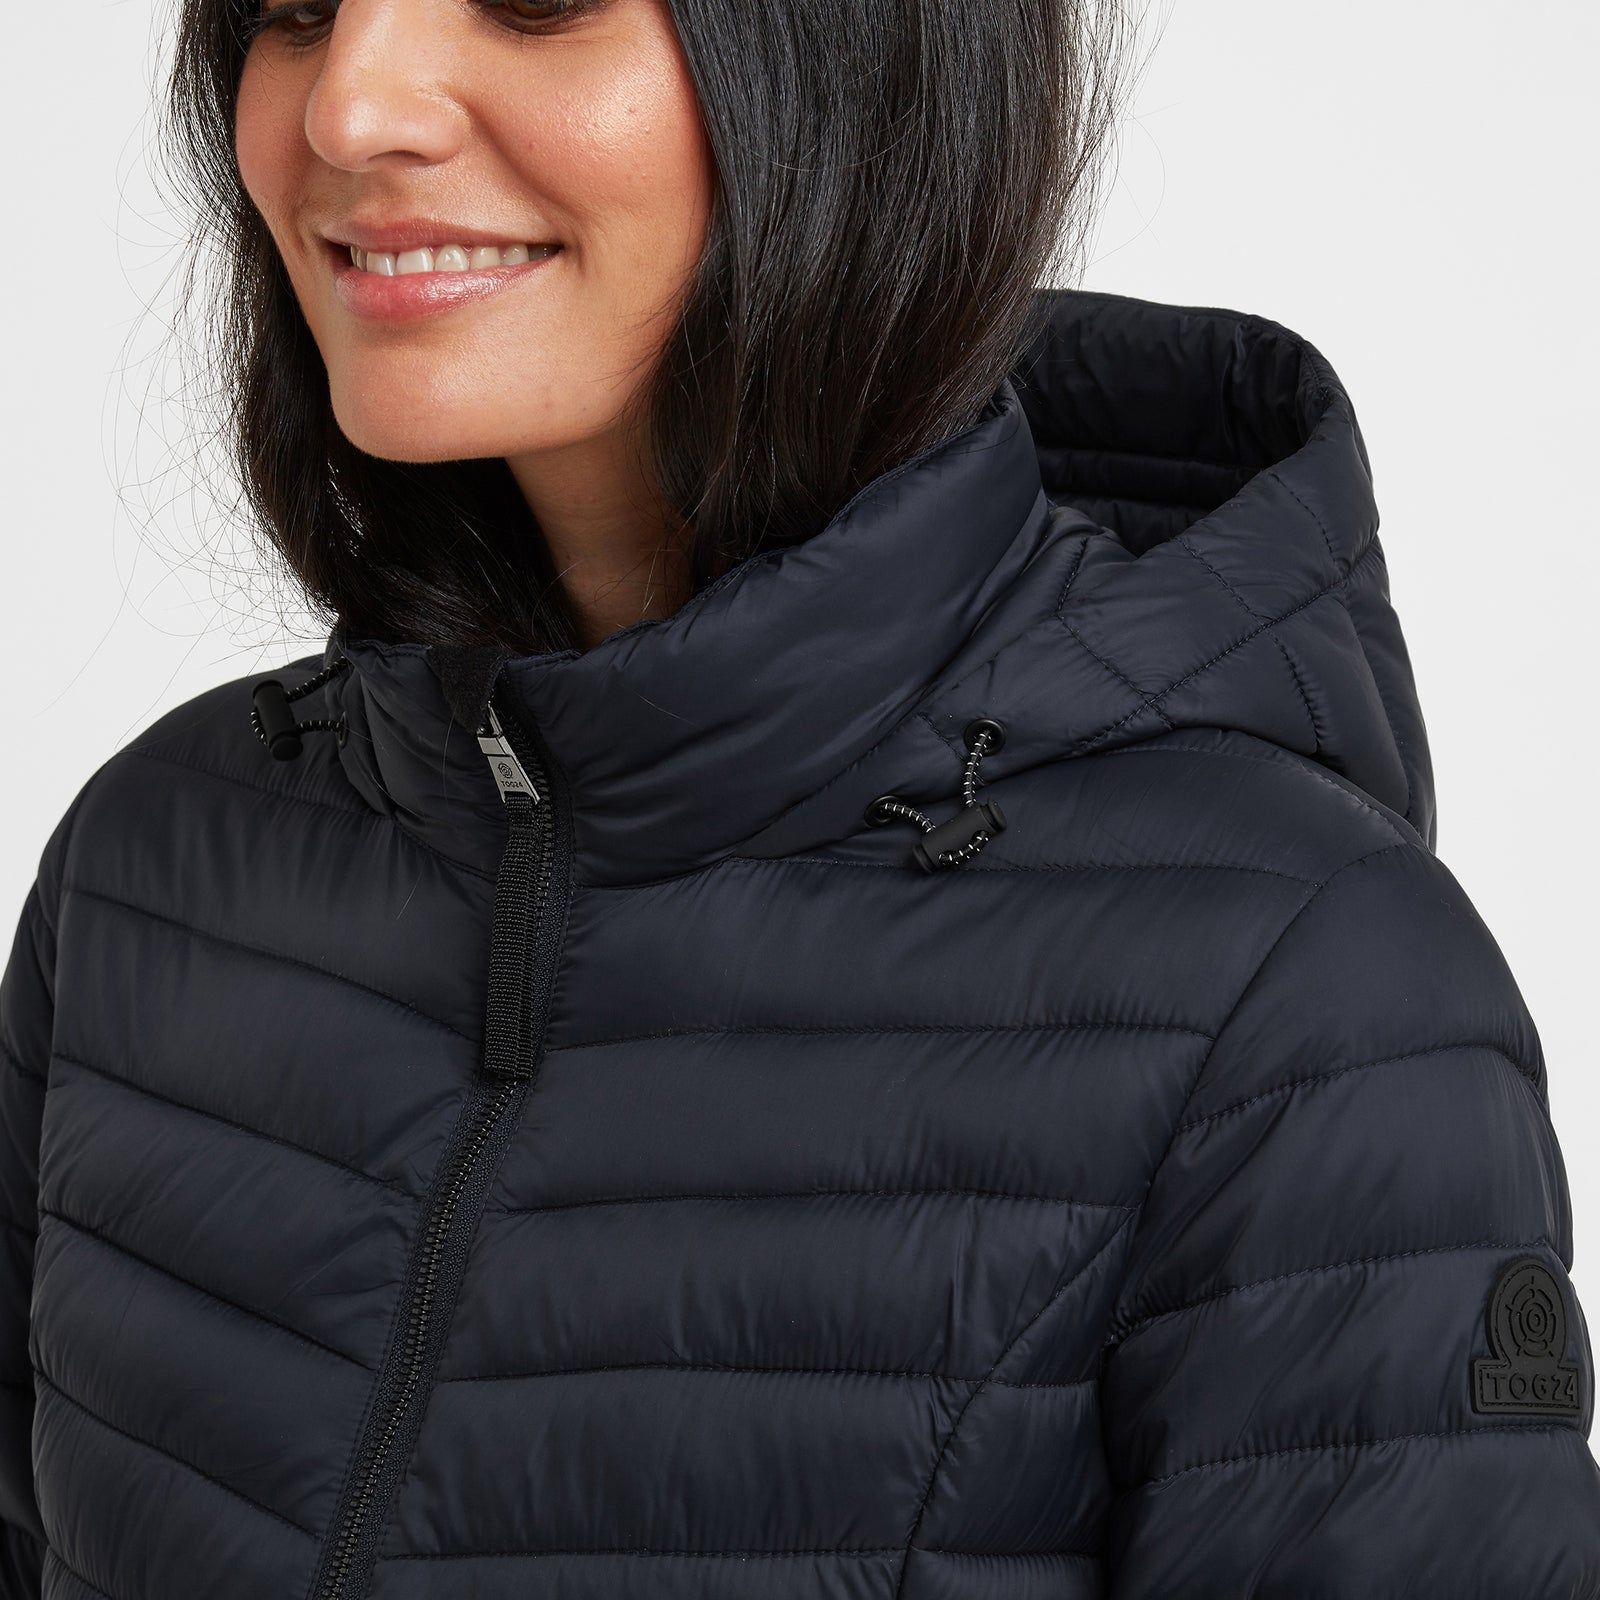 Lightweight, wind resistant and buttery soft, our Garriston quilted jacket gives you warmth without adding bulk and is designed in bold, chevron colour blocks inspired by moorland heather and the churning Atlantic sea. This distinctive and versatile jacket is perfect for travel as it squishes down small and springs back into shape when you need it. The thermal filling is made from recycled plastic bottles, so you'll be doing your bit to protect the environment too. Garriston has a cosy inner collar for added comfort and a fixed, insulated hood with toggle adjusters. There are two handy zip up pockets and a full length, easy pull zip at the front. The finishing touch is our iconic embossed rubber Yorkshire Rose badge on the sleeve.